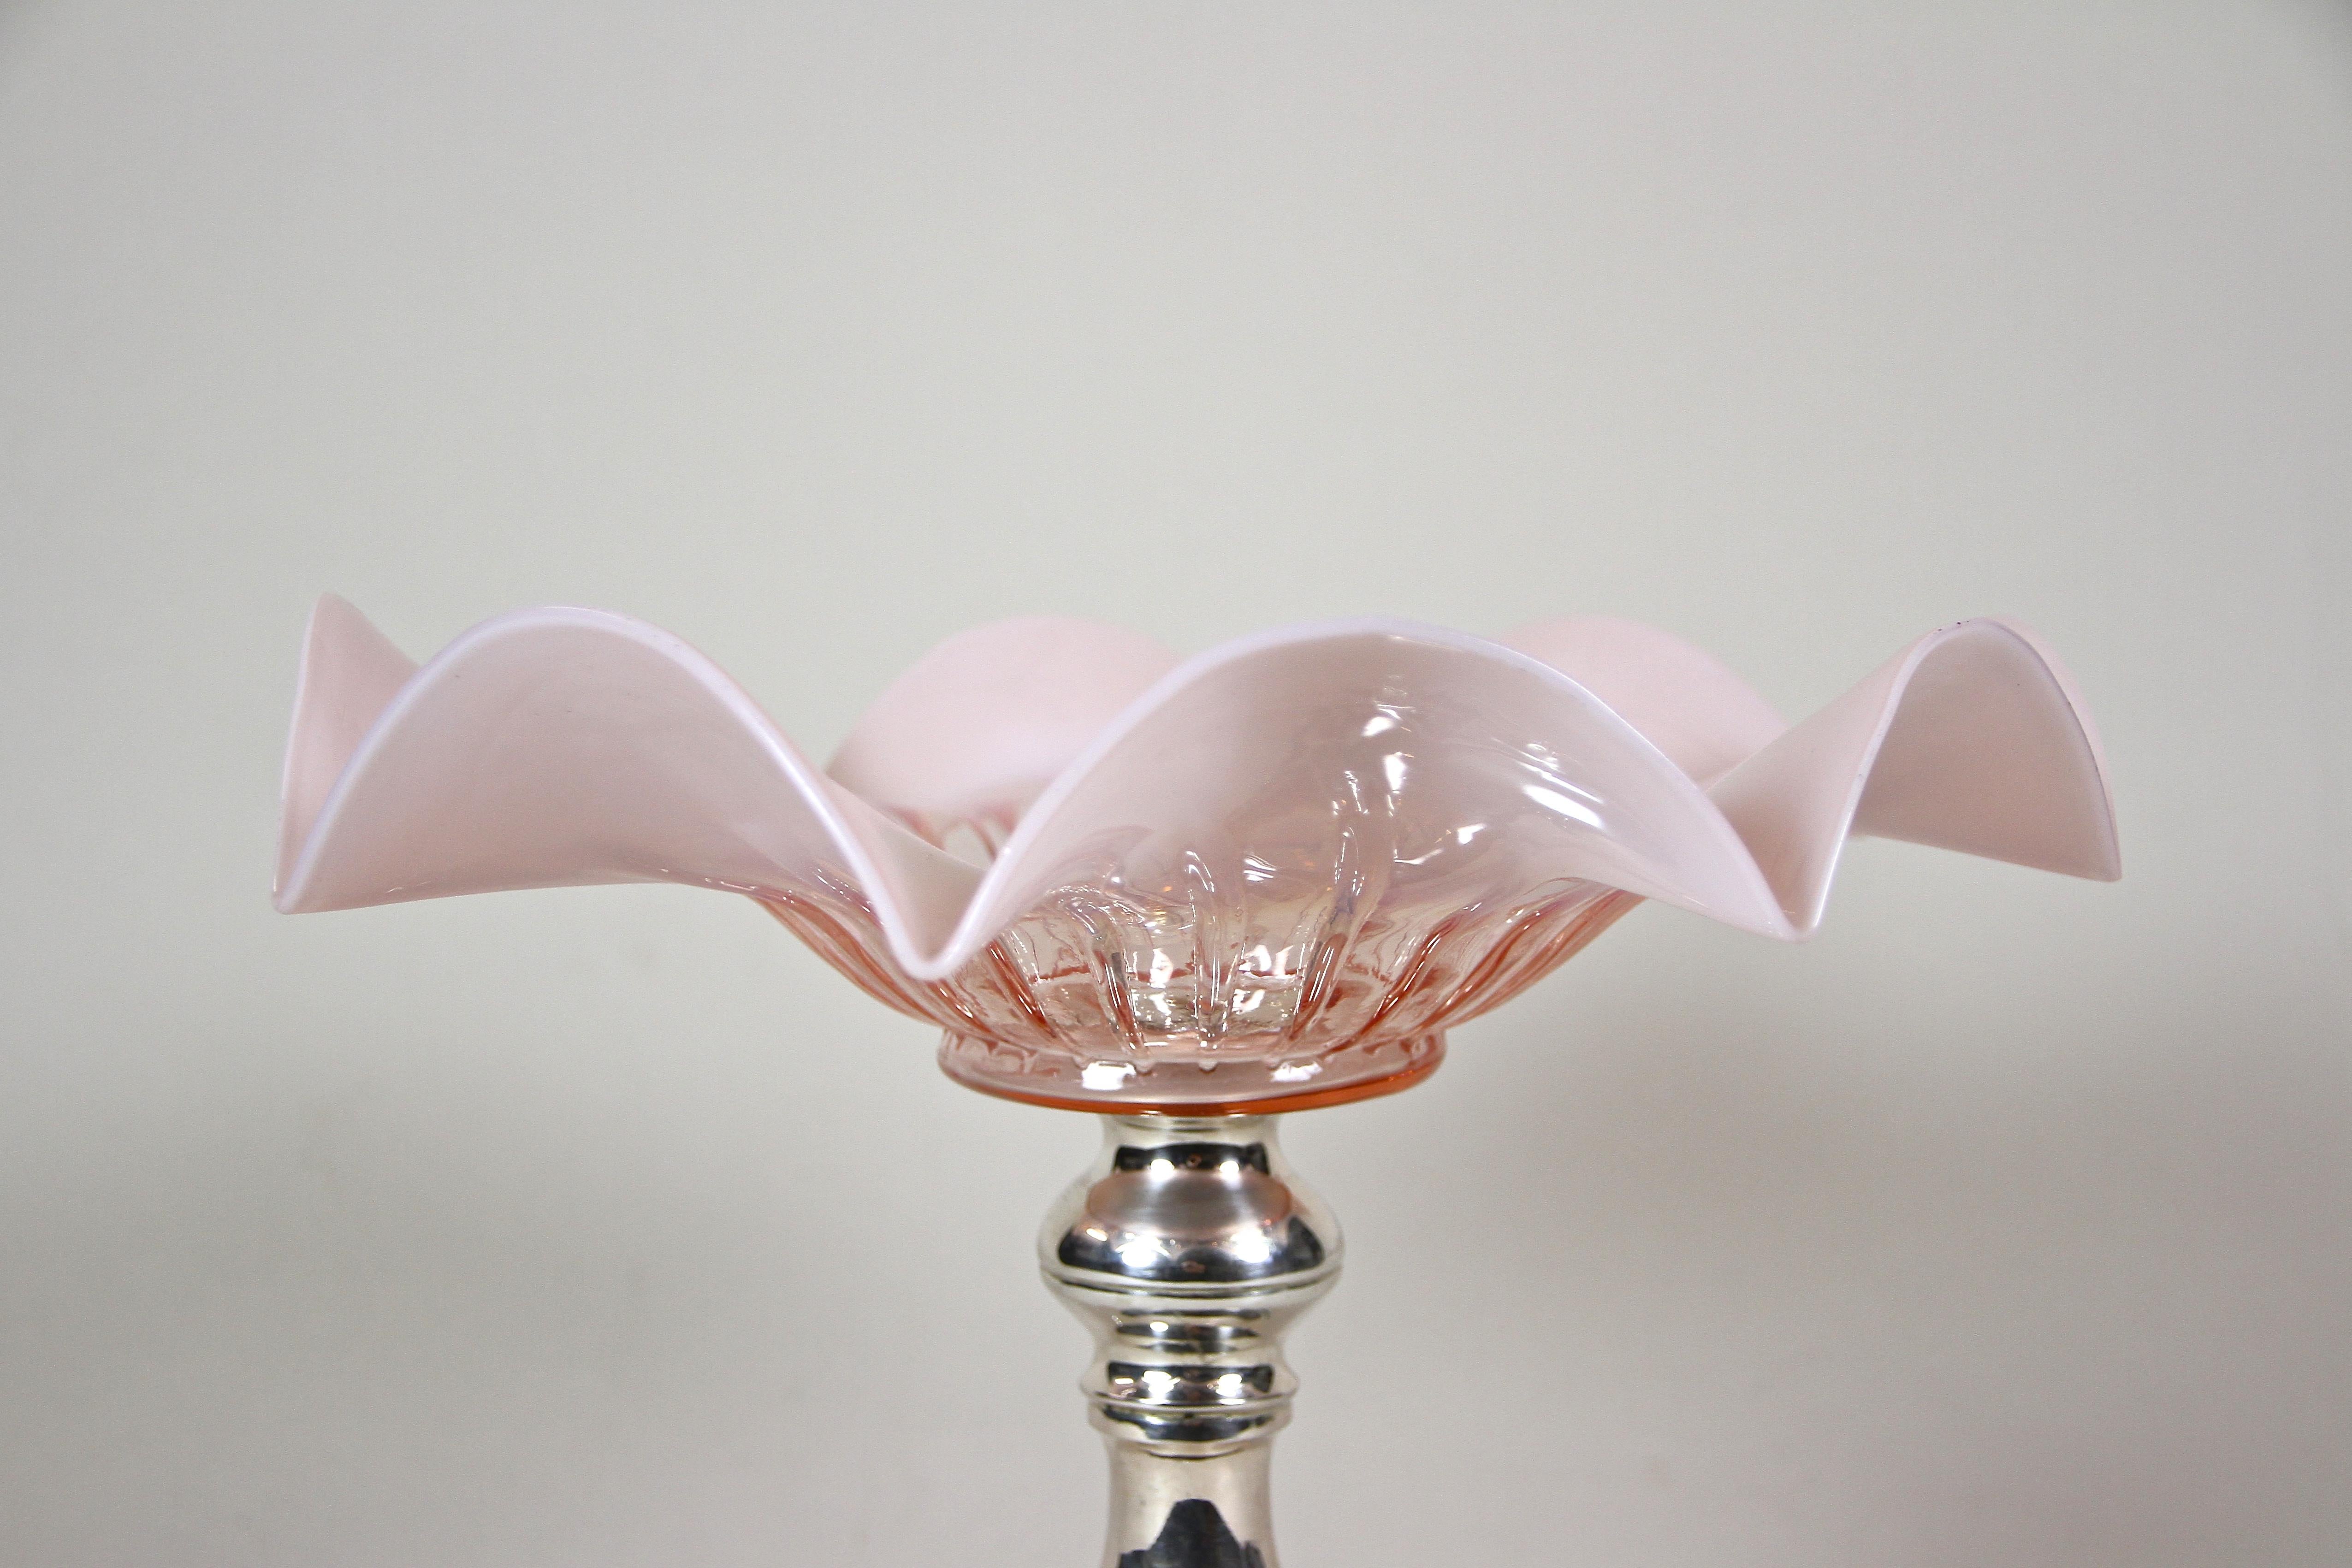 Lovely silver Art Nouveau centerpiece with ruffled glass bowl artfully made in Austria around 1900. A beautiful light pink shining mouth blown glass bowl sits on a fanatstic designed, solid 800 silver base adorned by extraordinary worked feet. The